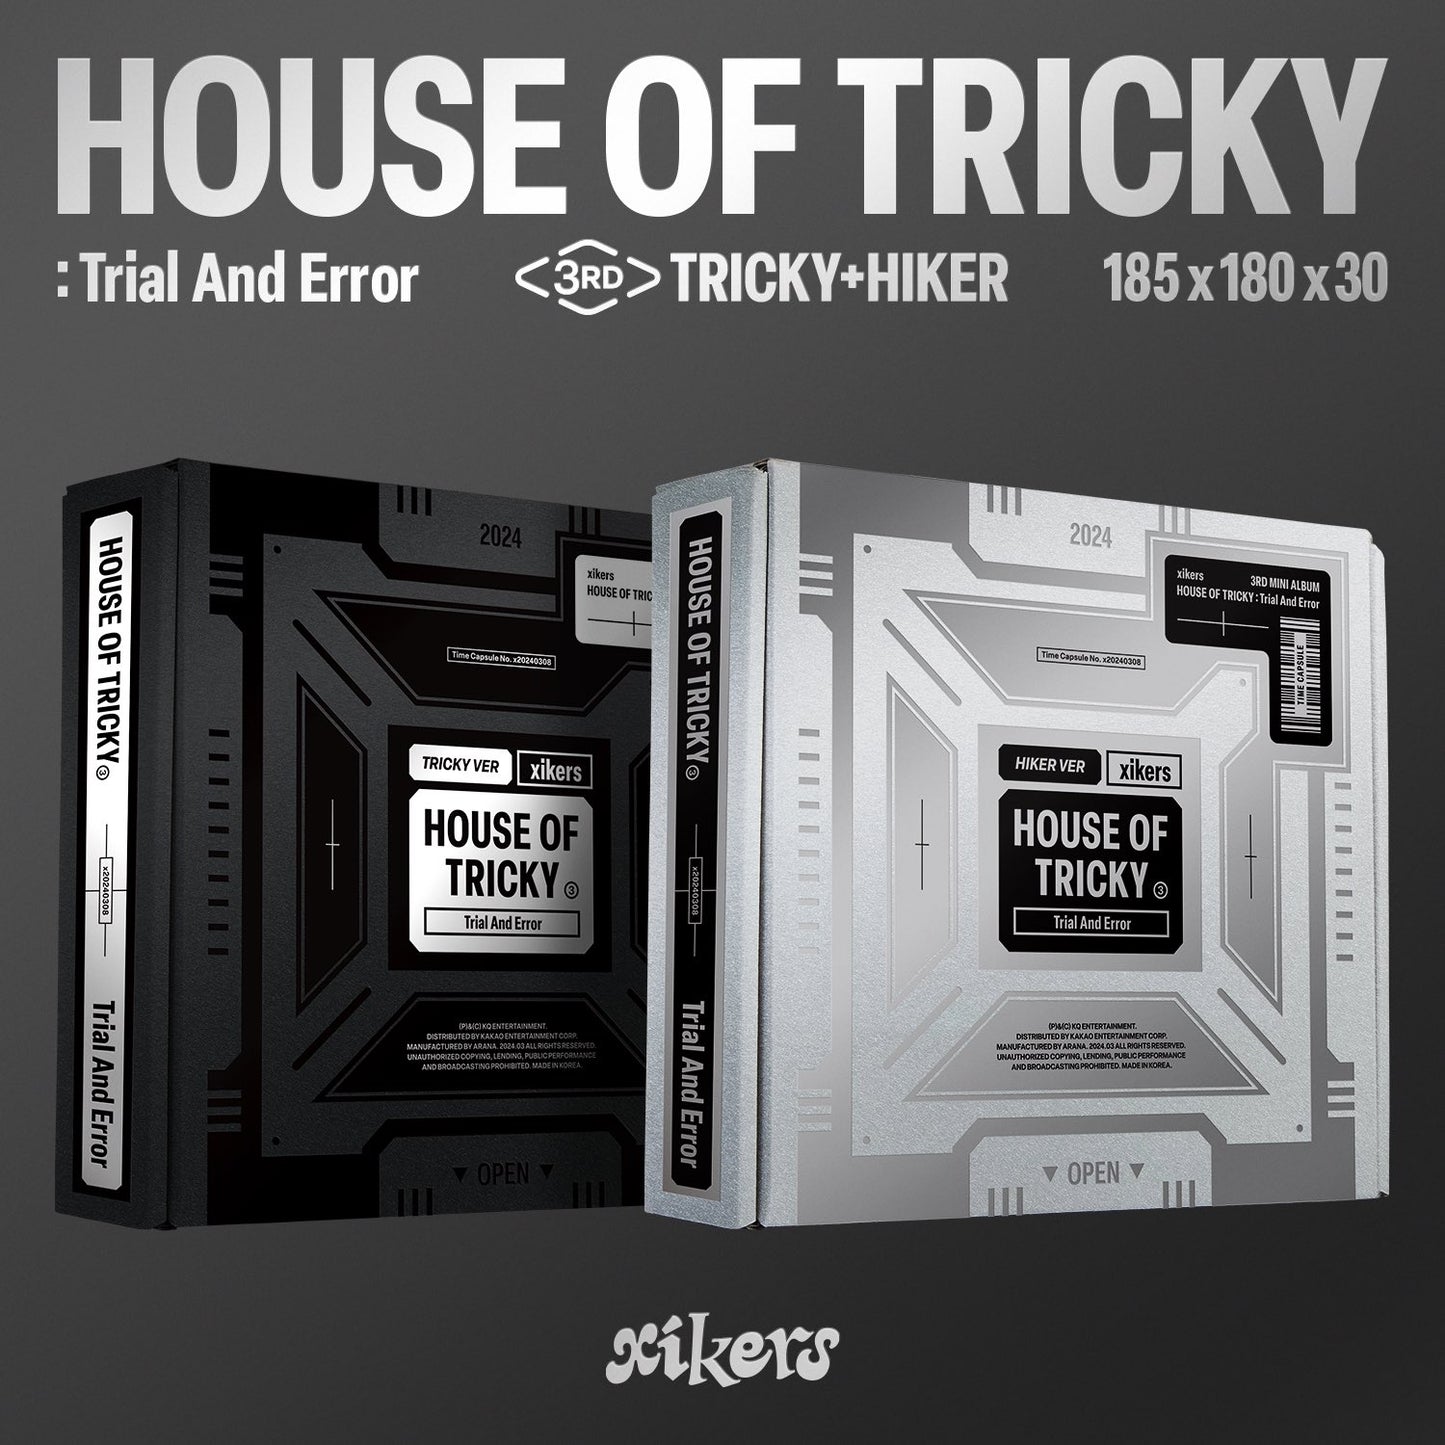 [PRE-ORDER] xikers - 3RD MINI ALBUM [HOUSE OF TRICKY : Trial And Error]